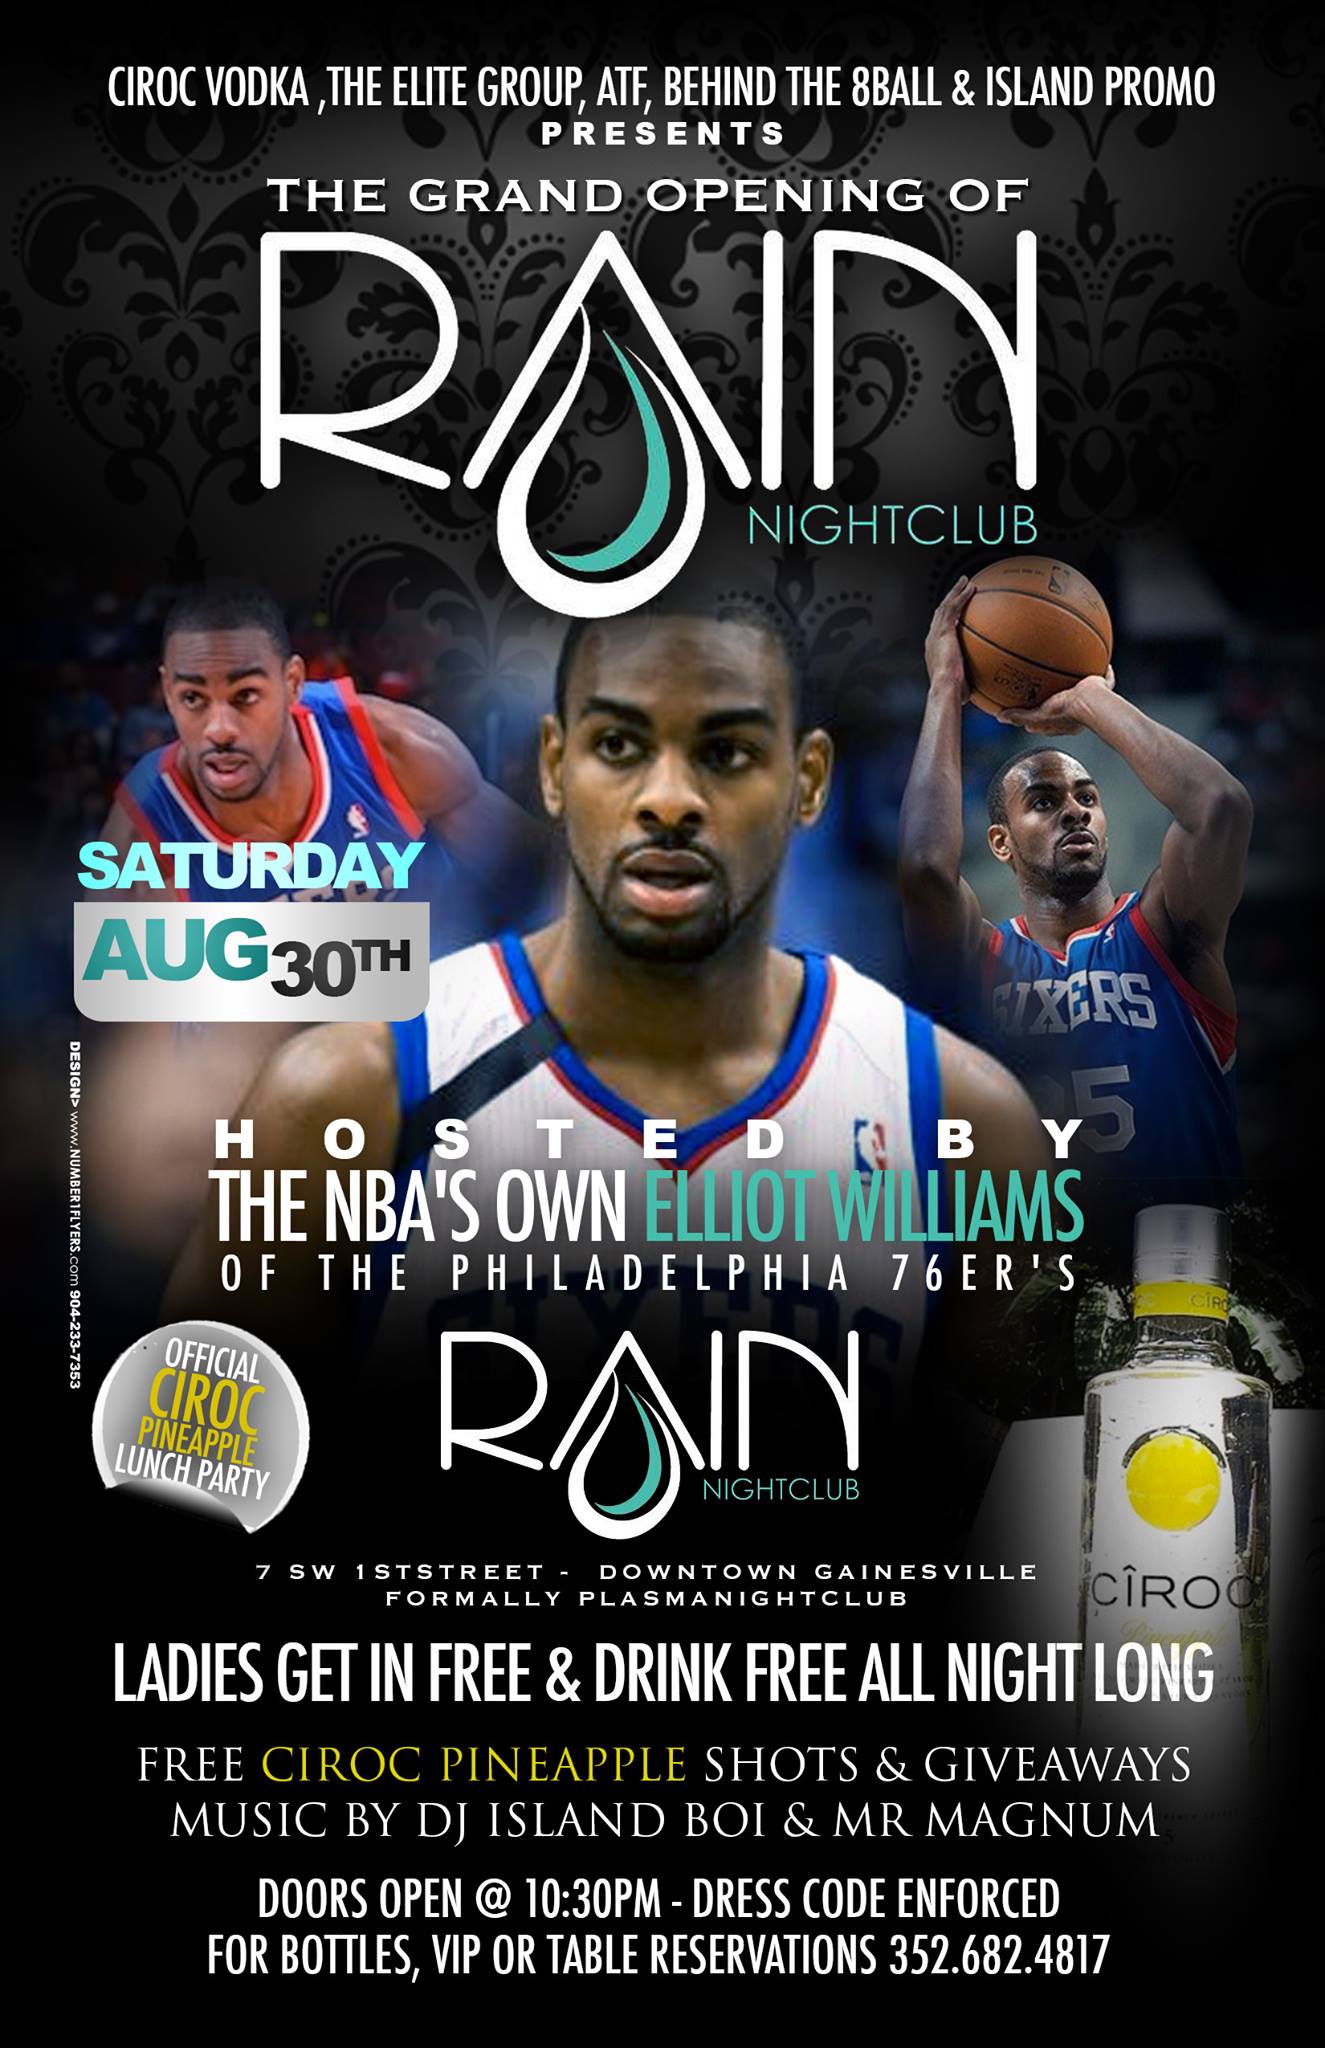 The Grand Opening of Rain Night Club in Gainesville, HOSTED BY THE NBA'S OWN ELLIOT WILLIAMS OF THE PHILADELPHIA 76ER'S, MUSIC BY DJ ISLAND BOI & MR MAGNUM